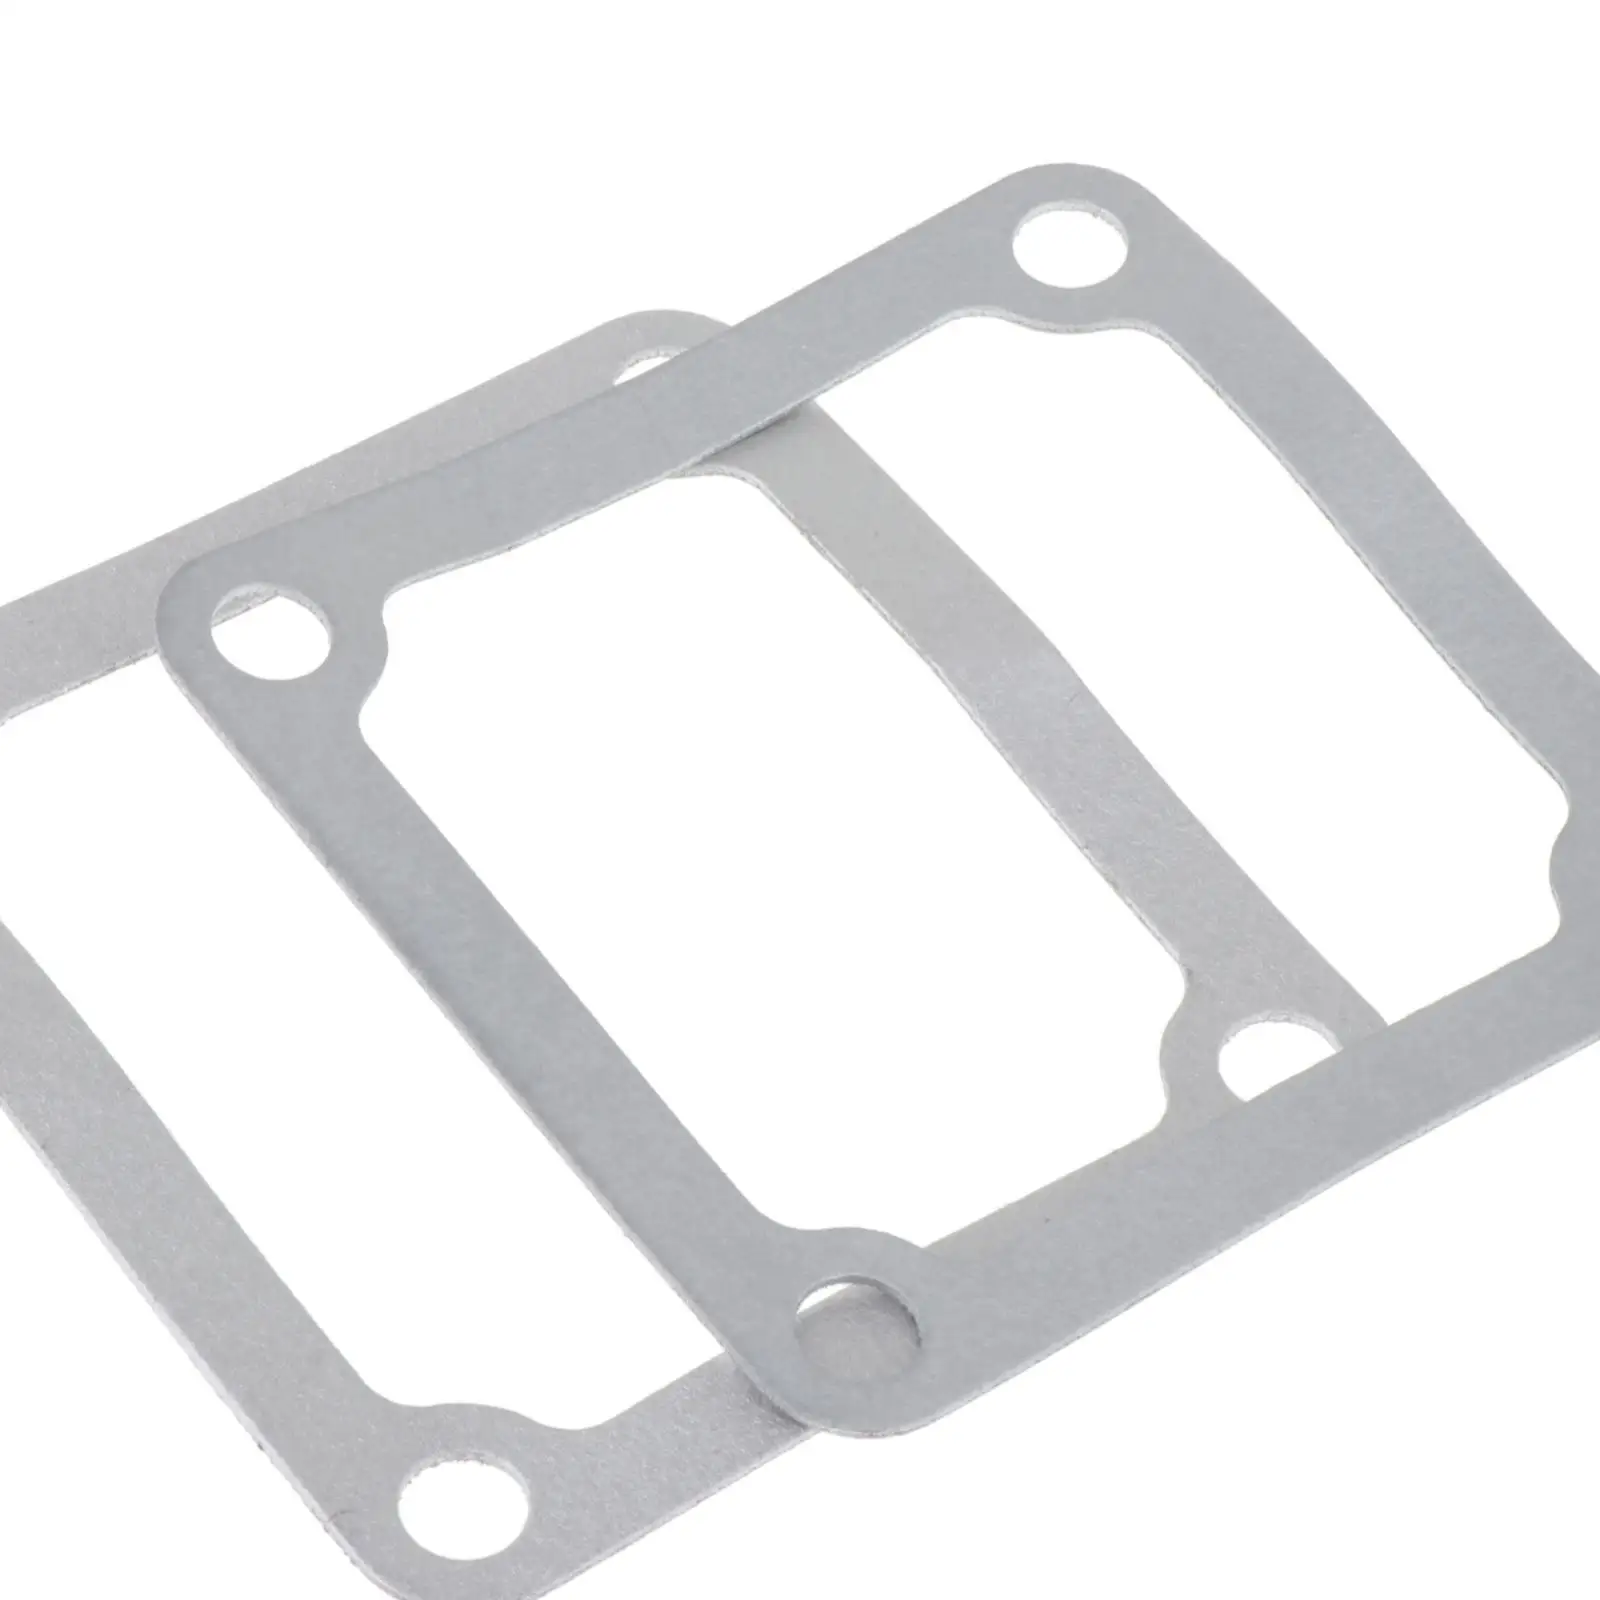 2 Pieces Intake Heater Grid Gaskets Durable Portable Professional Vehicle Power Directly Replaces Spare Replacement Auto Parts